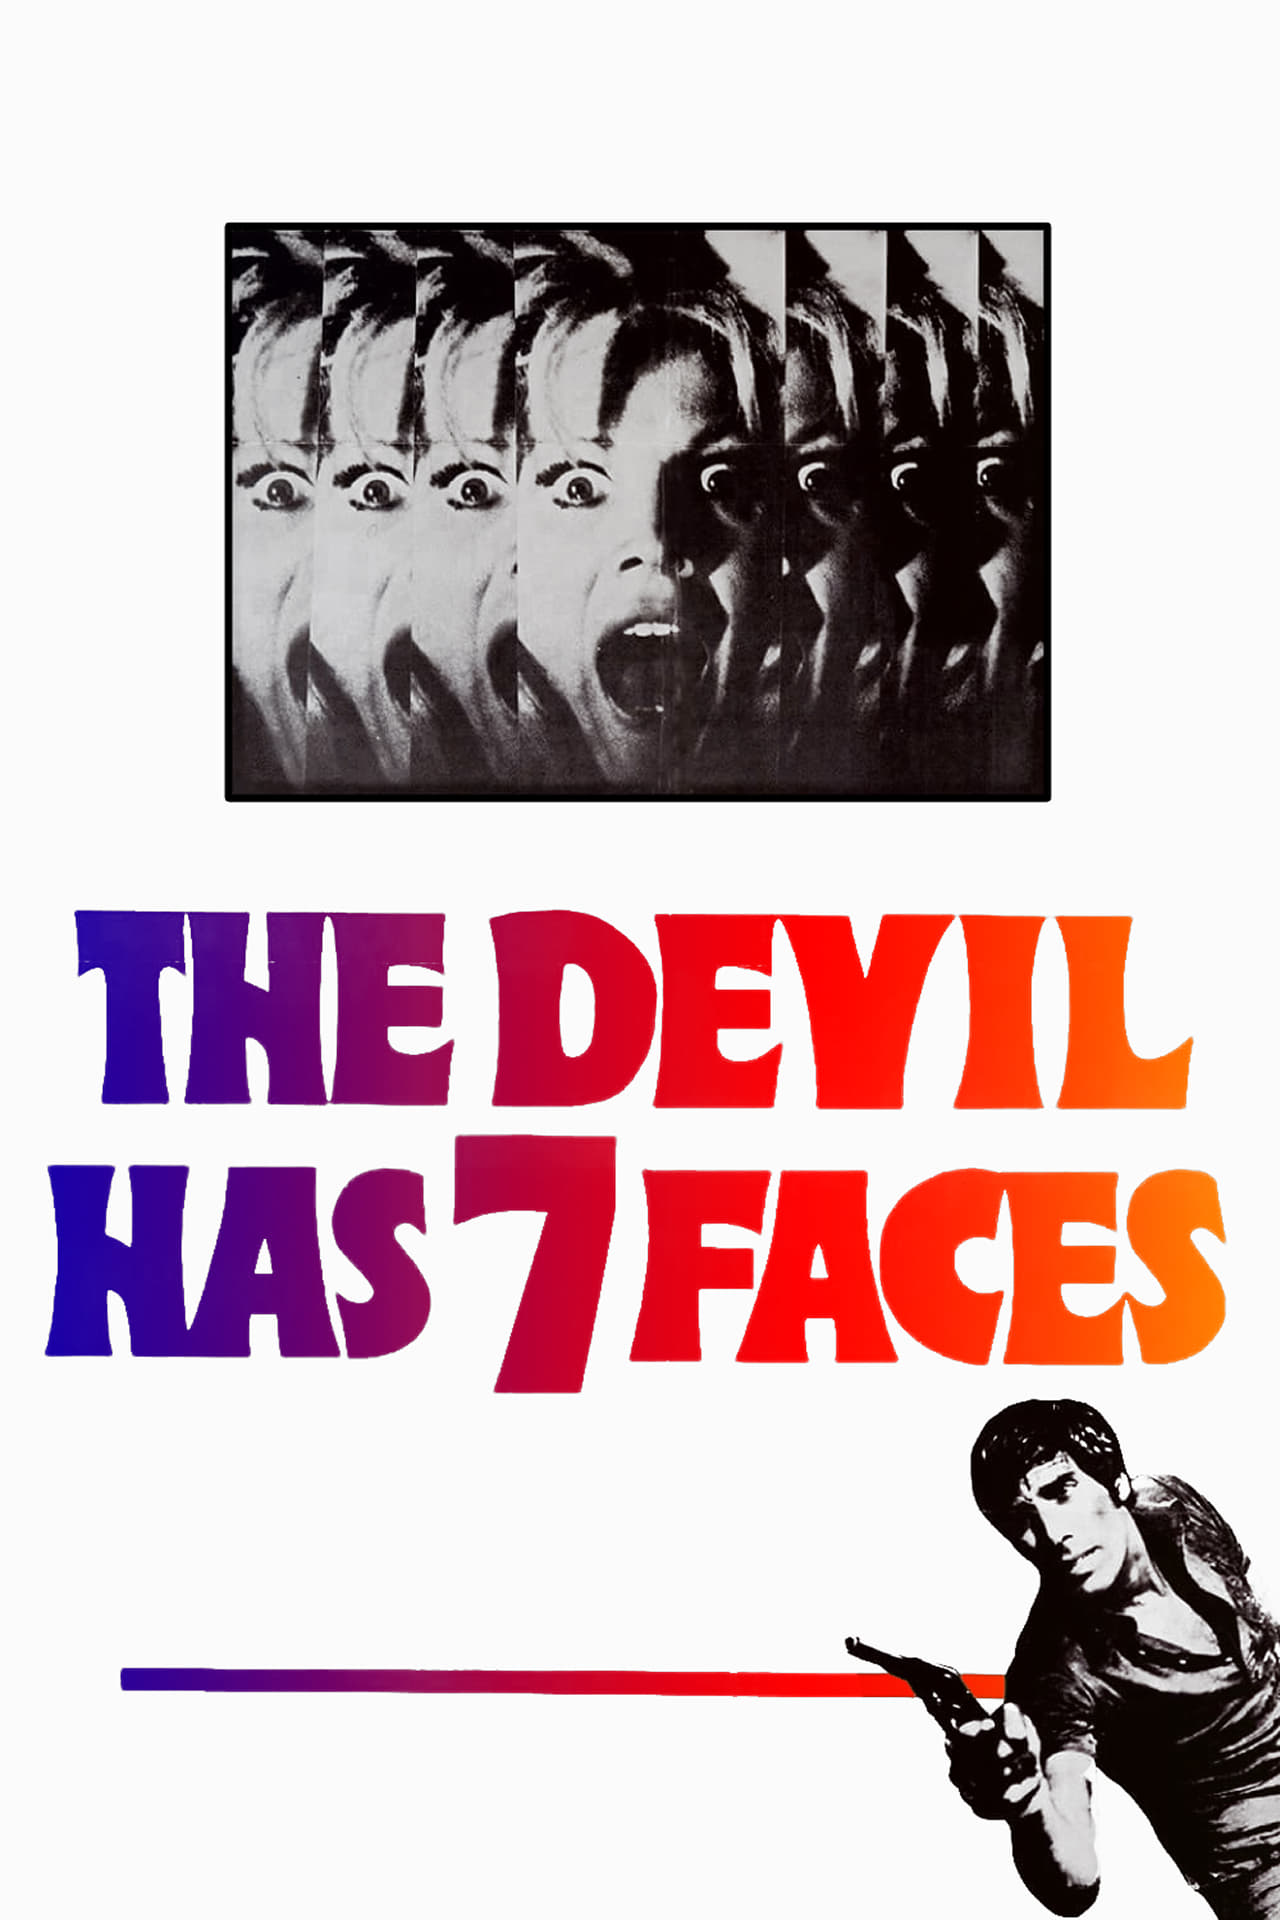 The Devil with Seven Faces (1971)